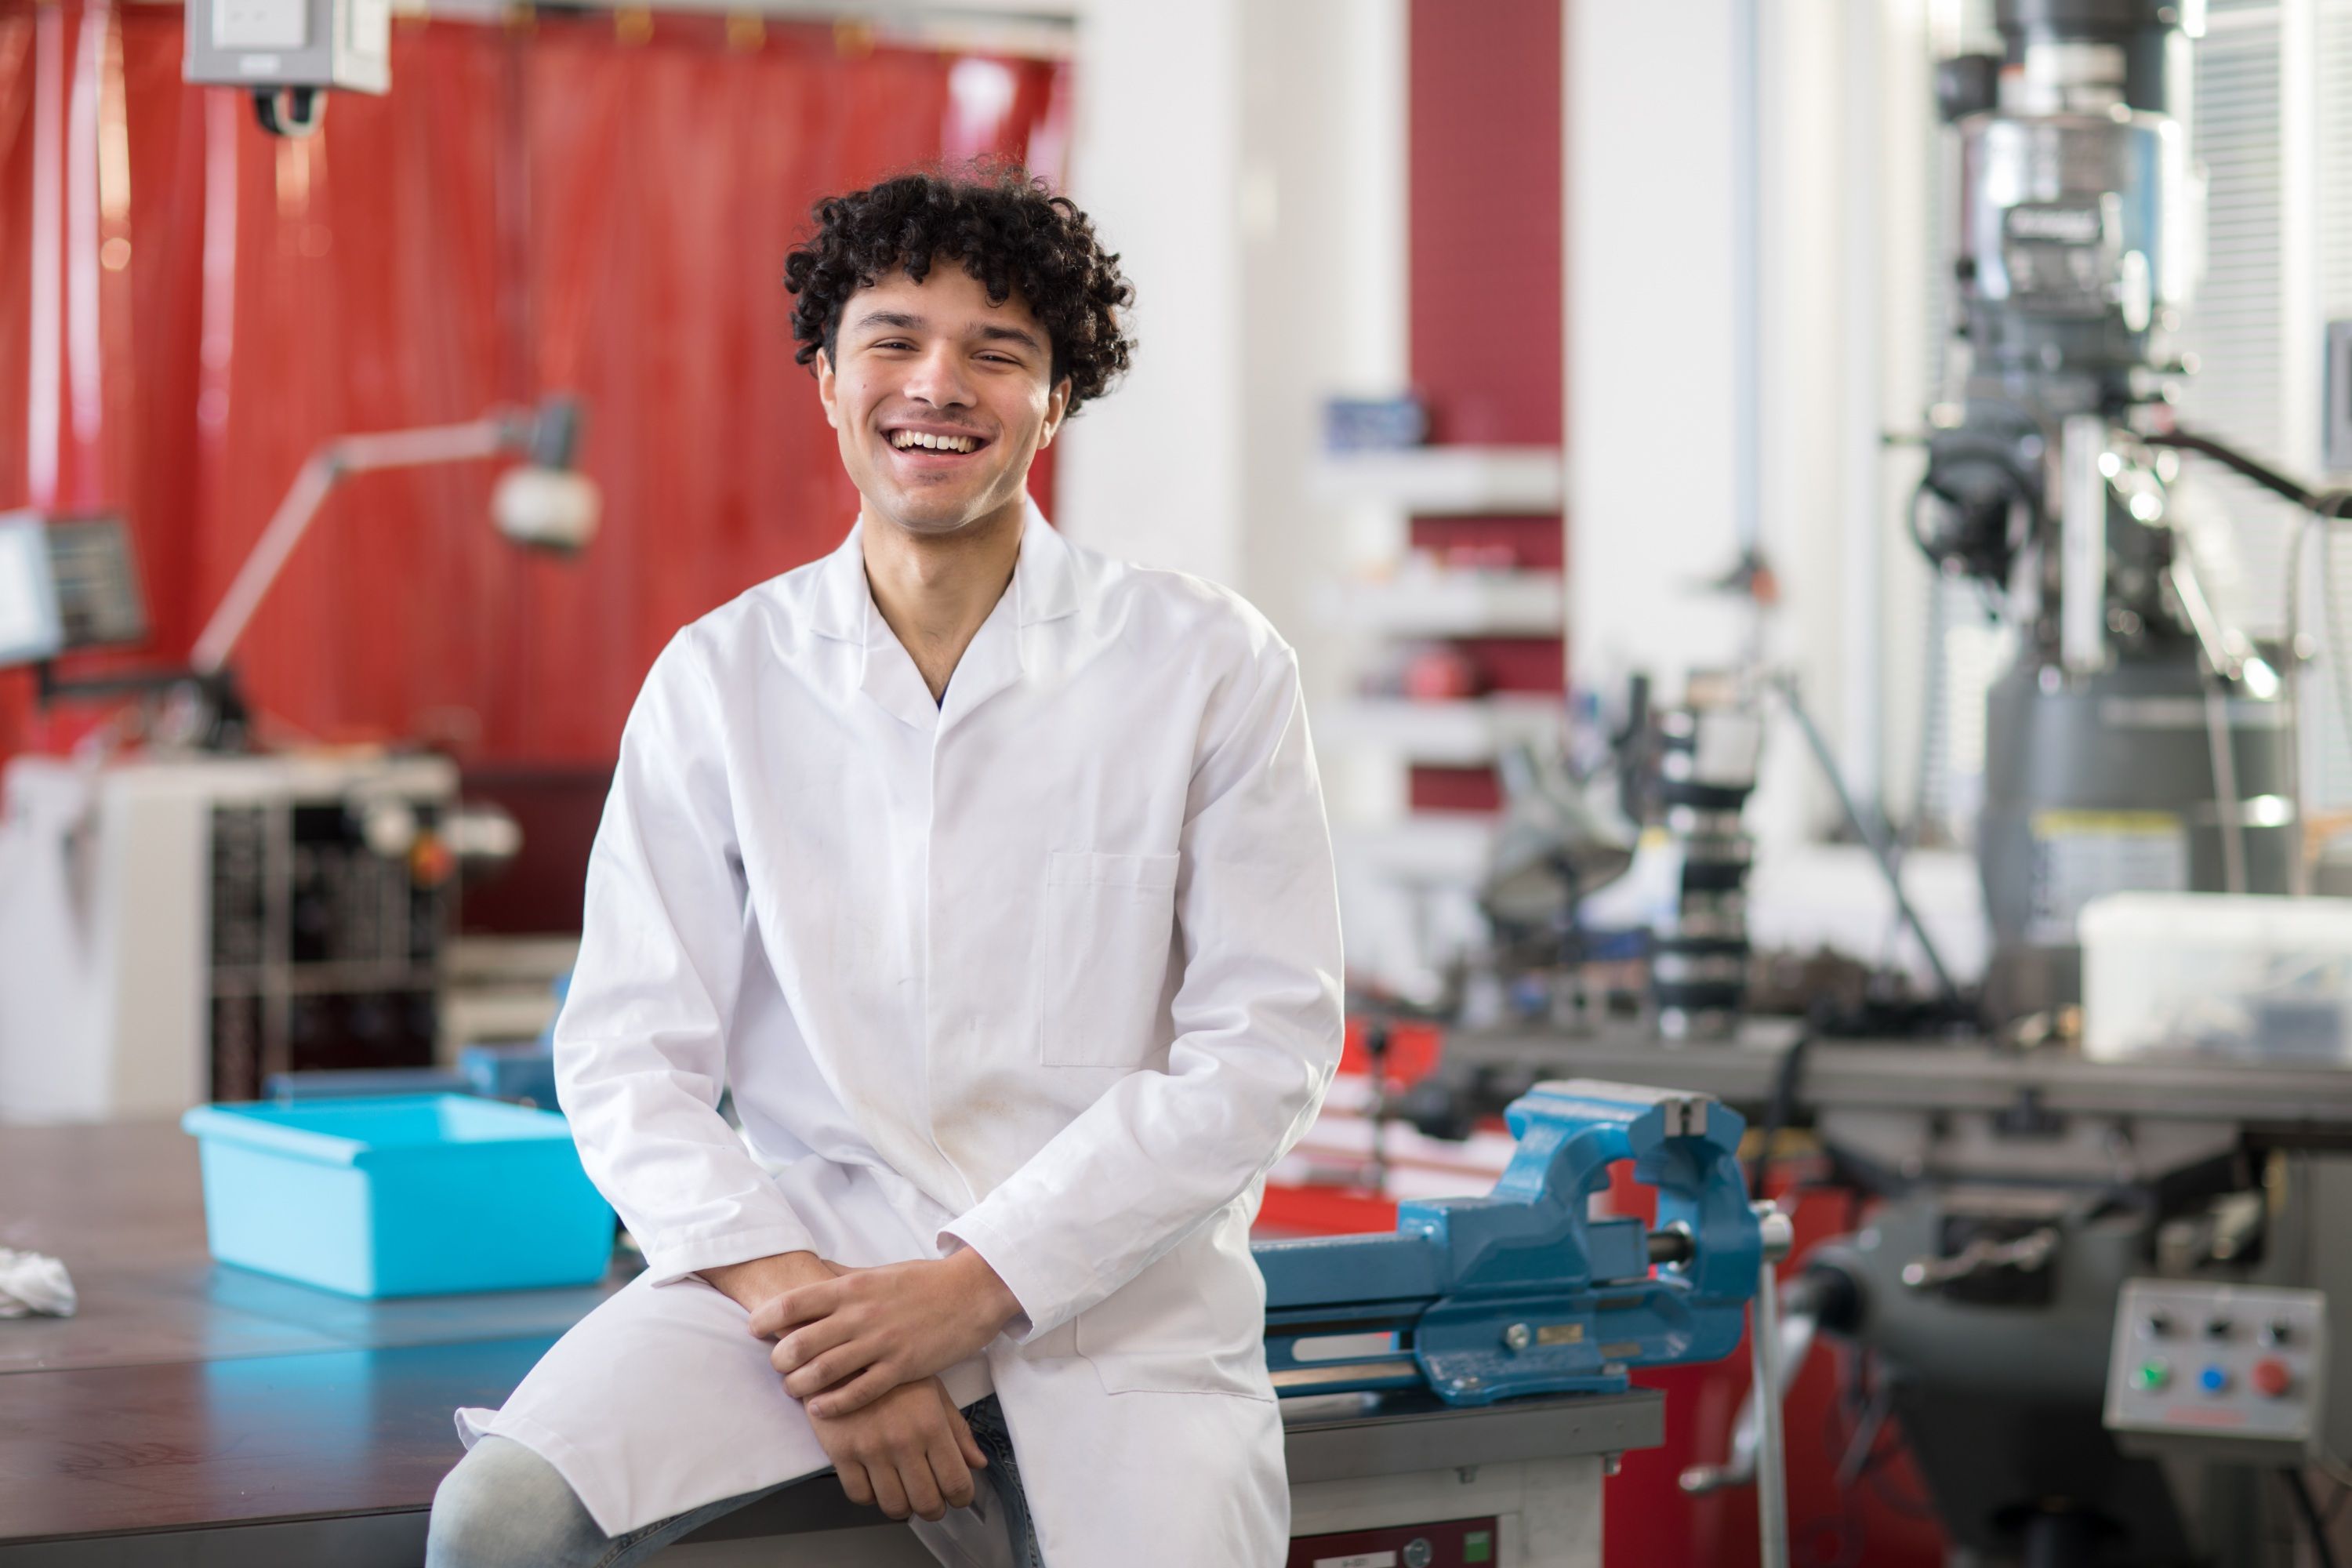 A student in a lab coat smiling at the camera